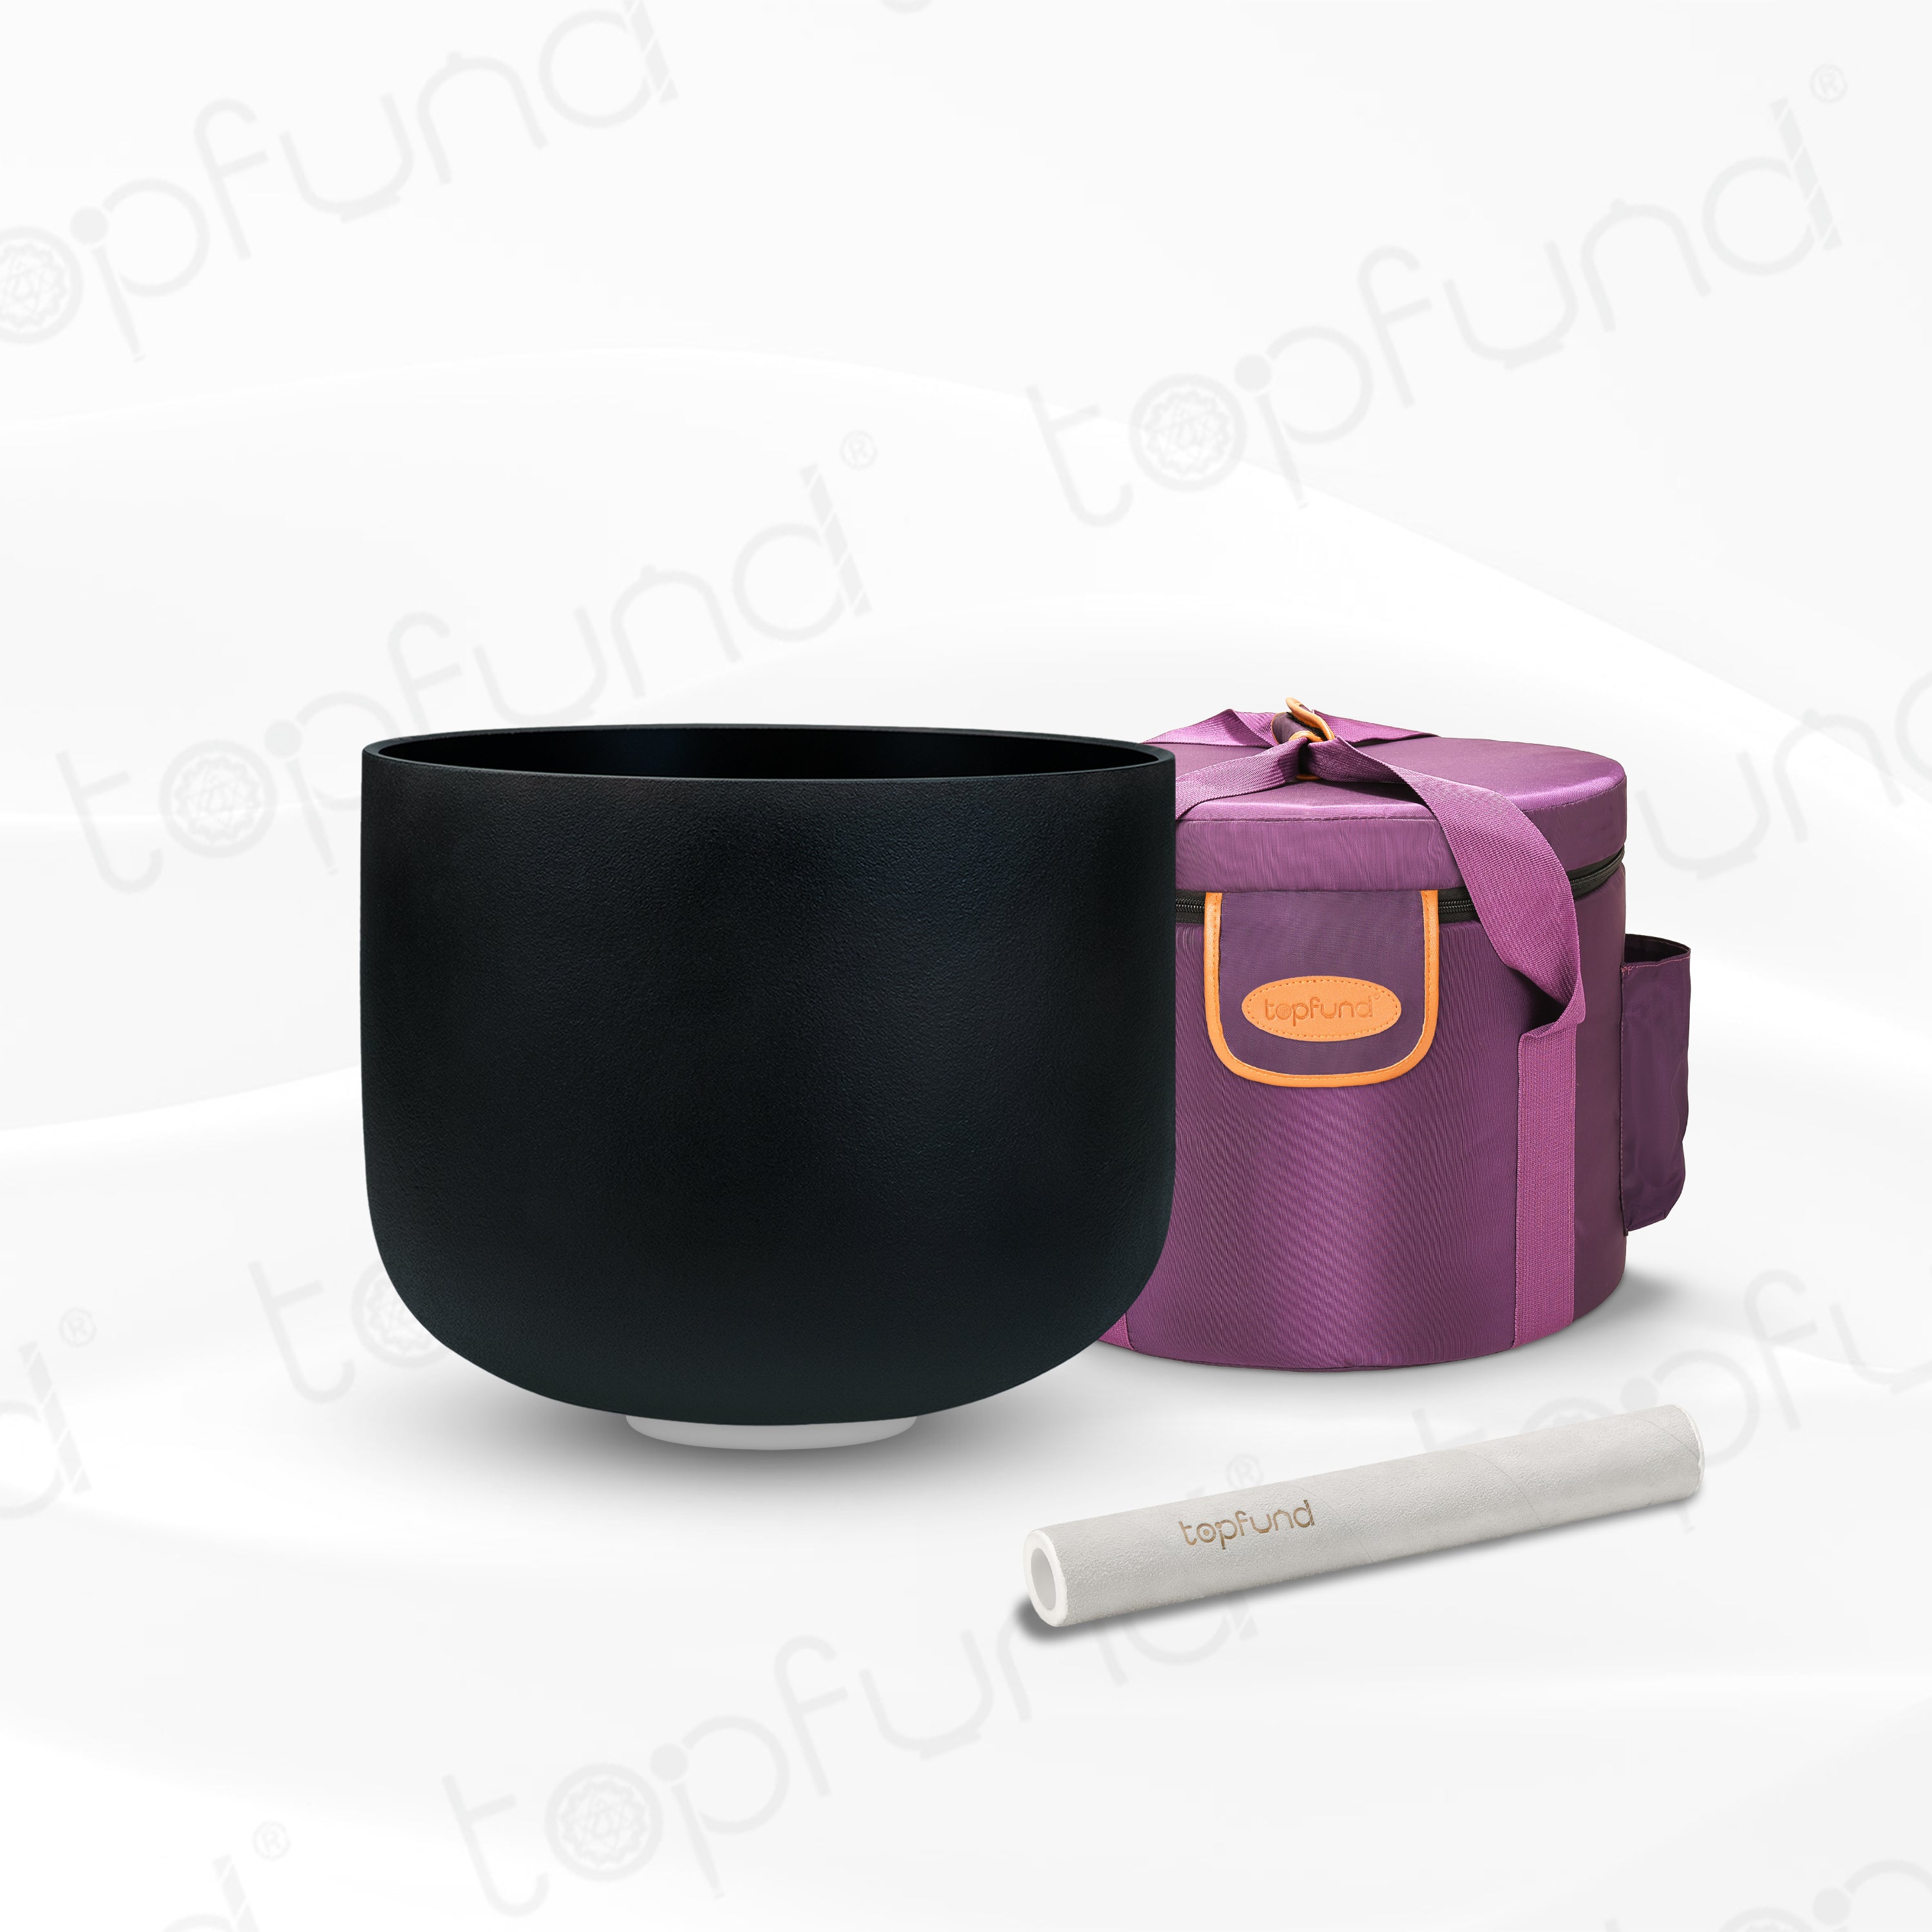 TOPFUND 432 Hz Black G Note Crystal Singing Bowl Throat Chakra 10 inch with Heavy Duty Carrying Case and Singing Bowl Mallet Suede Striker - TOPFUND Crystal Singing Bowl